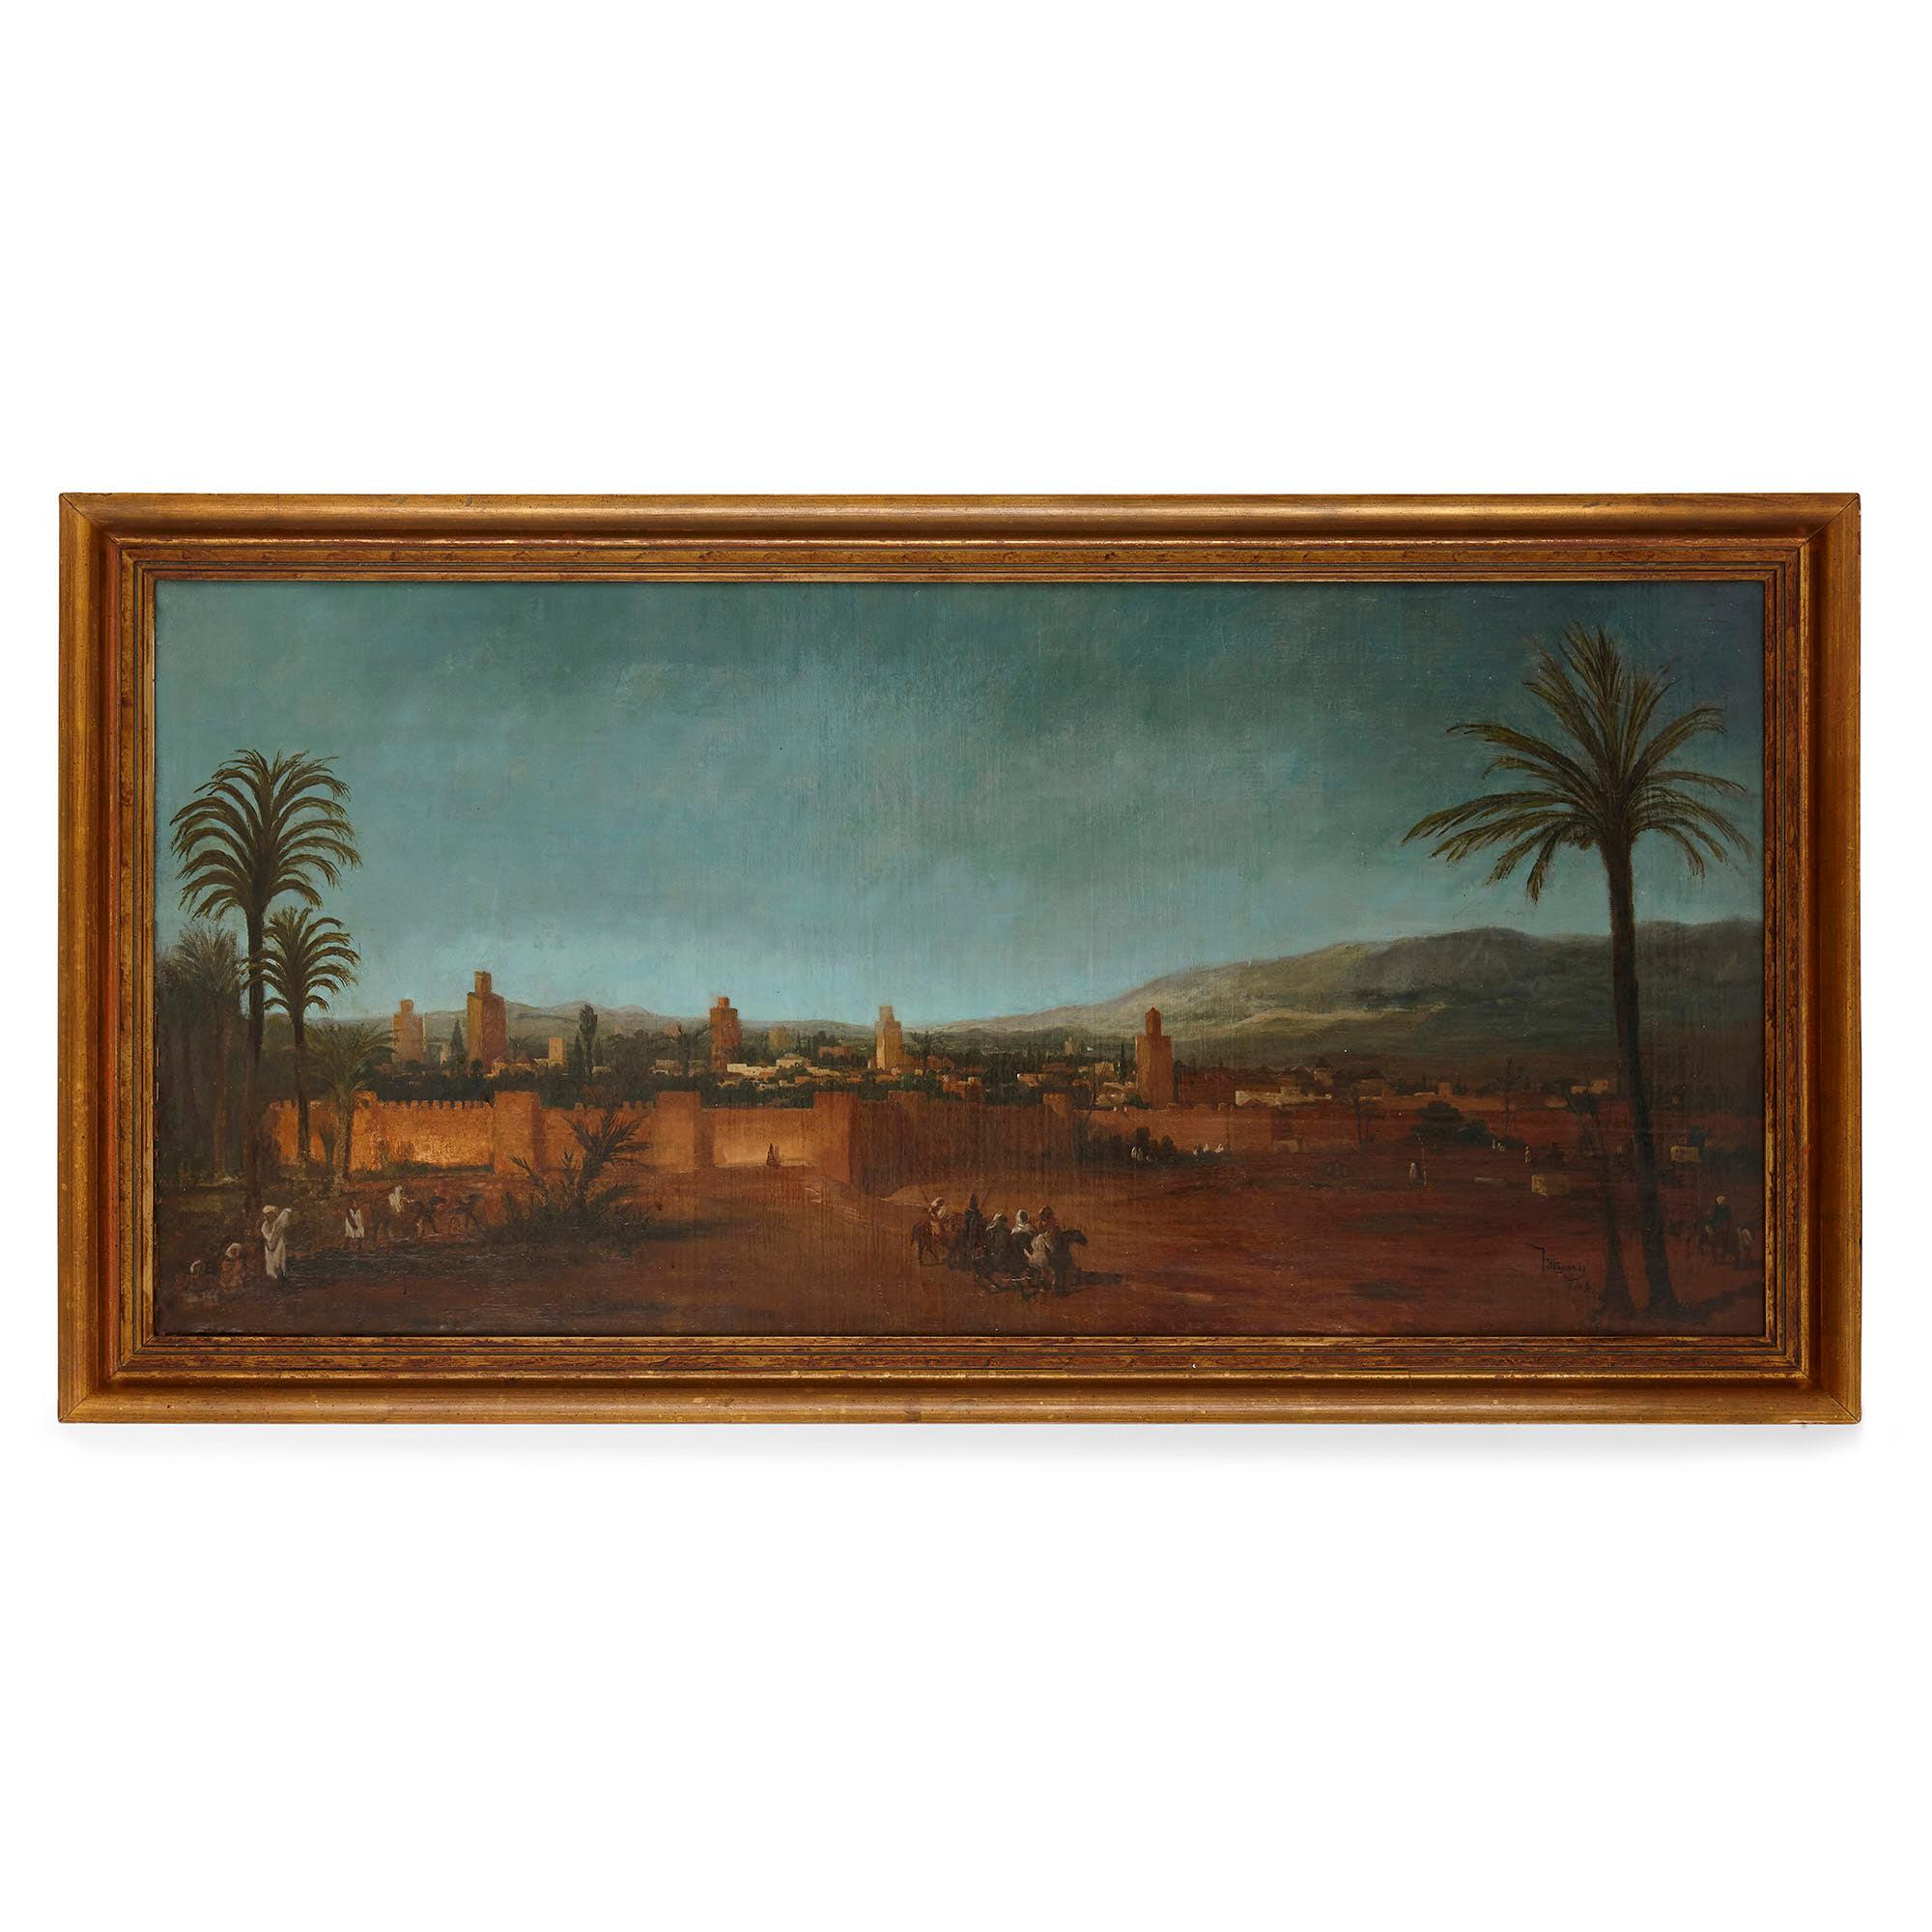 Unknown Landscape Painting - Orientalist oil painting of the Moroccan city of Fez